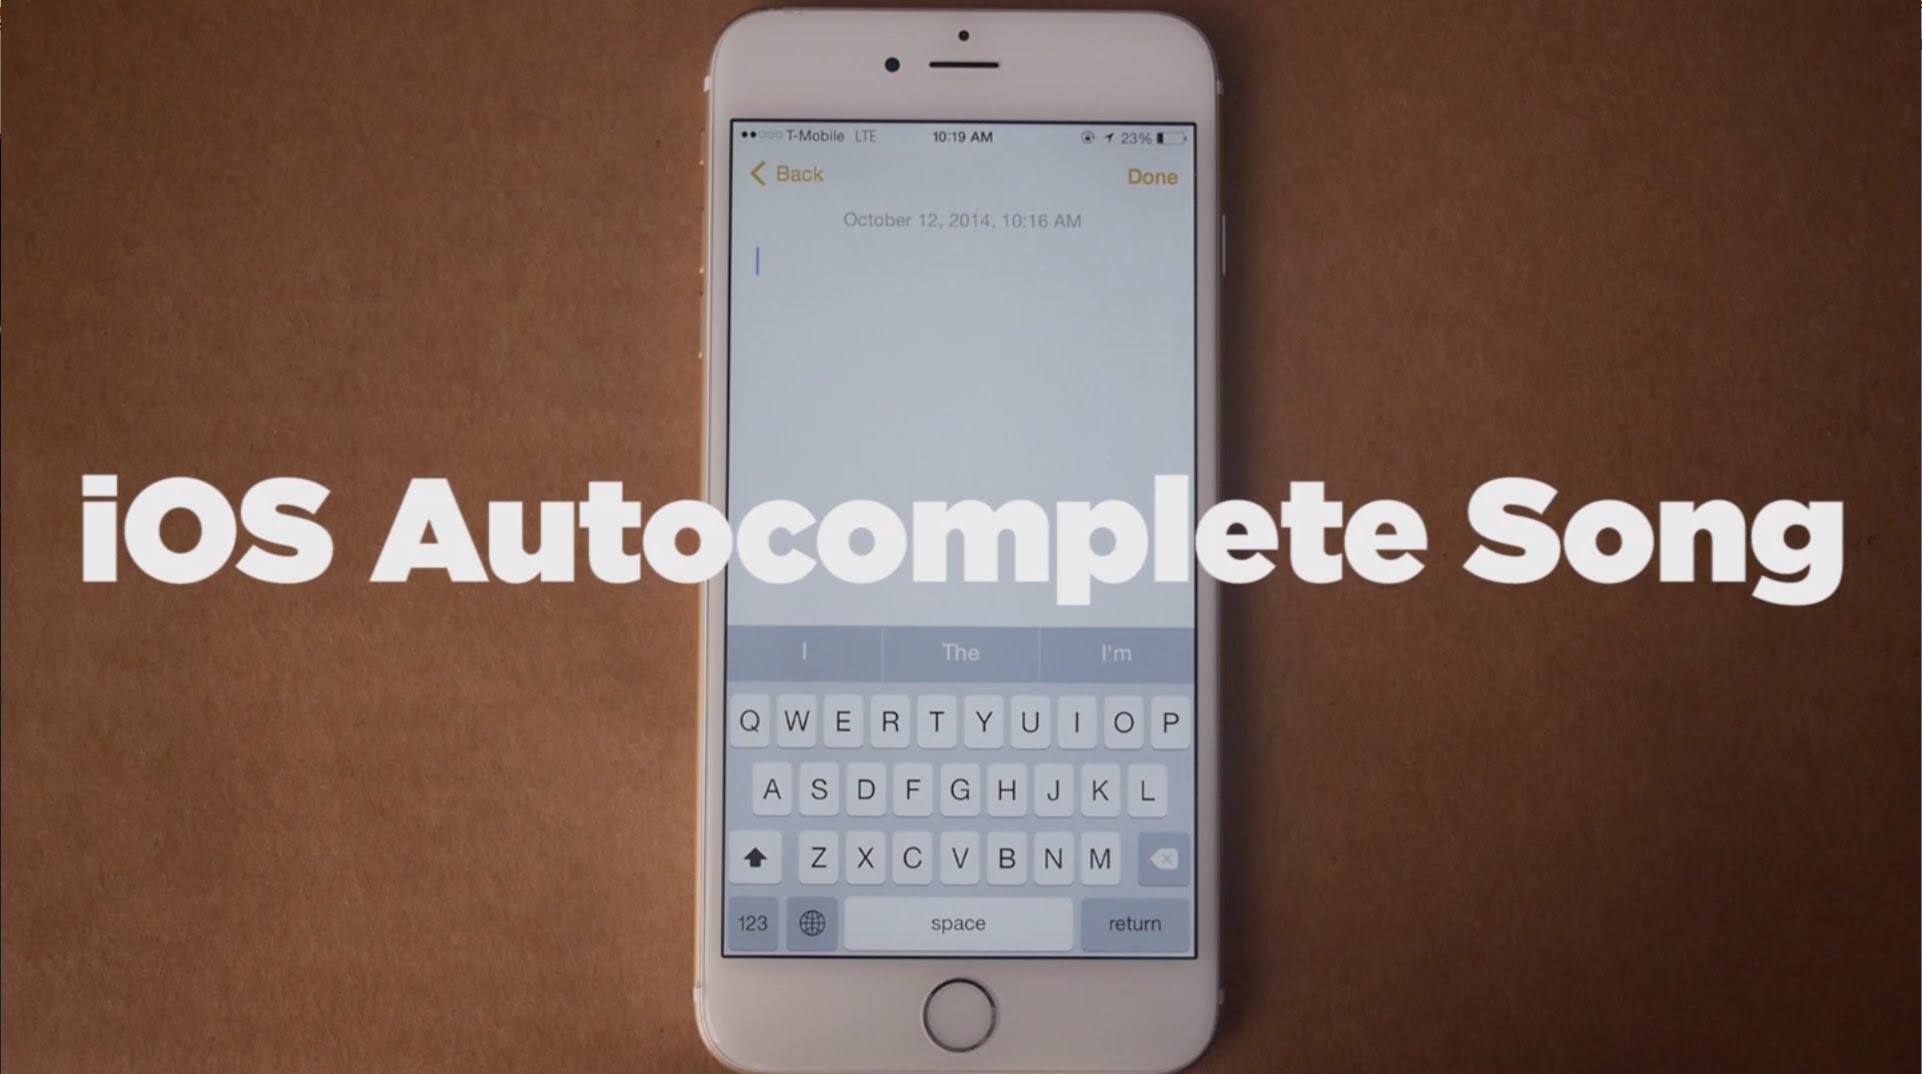 iPhone 6 als Songwriter? Der iOS 8 Autocomplete Song! (Video) 10